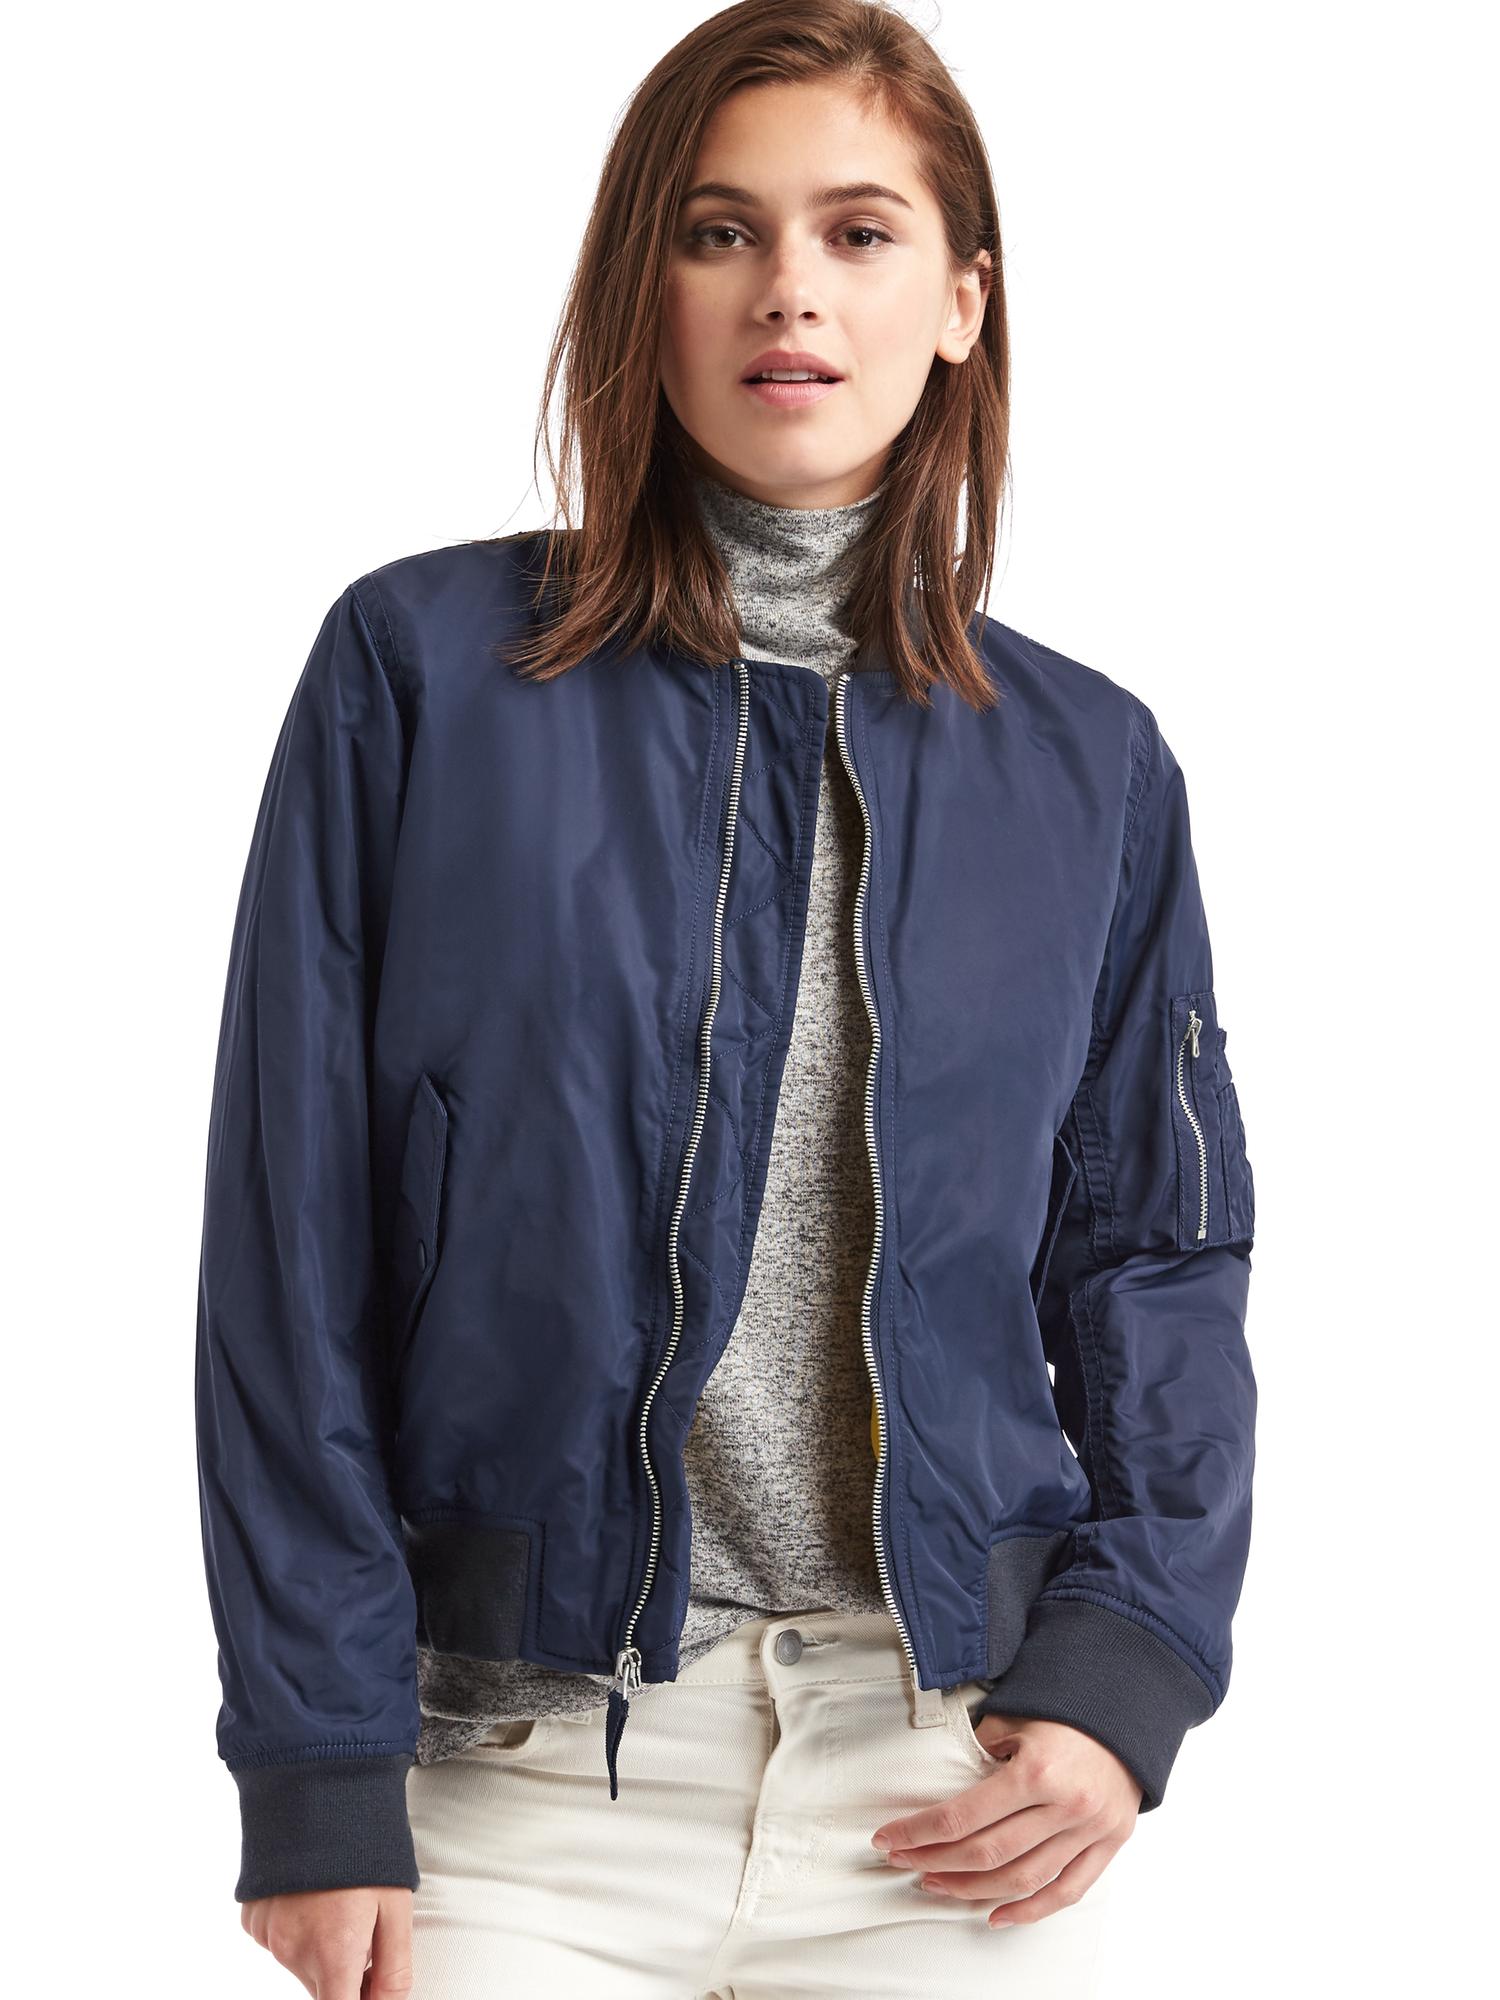 denim bomber jackets for women(gap) - jackets in my home